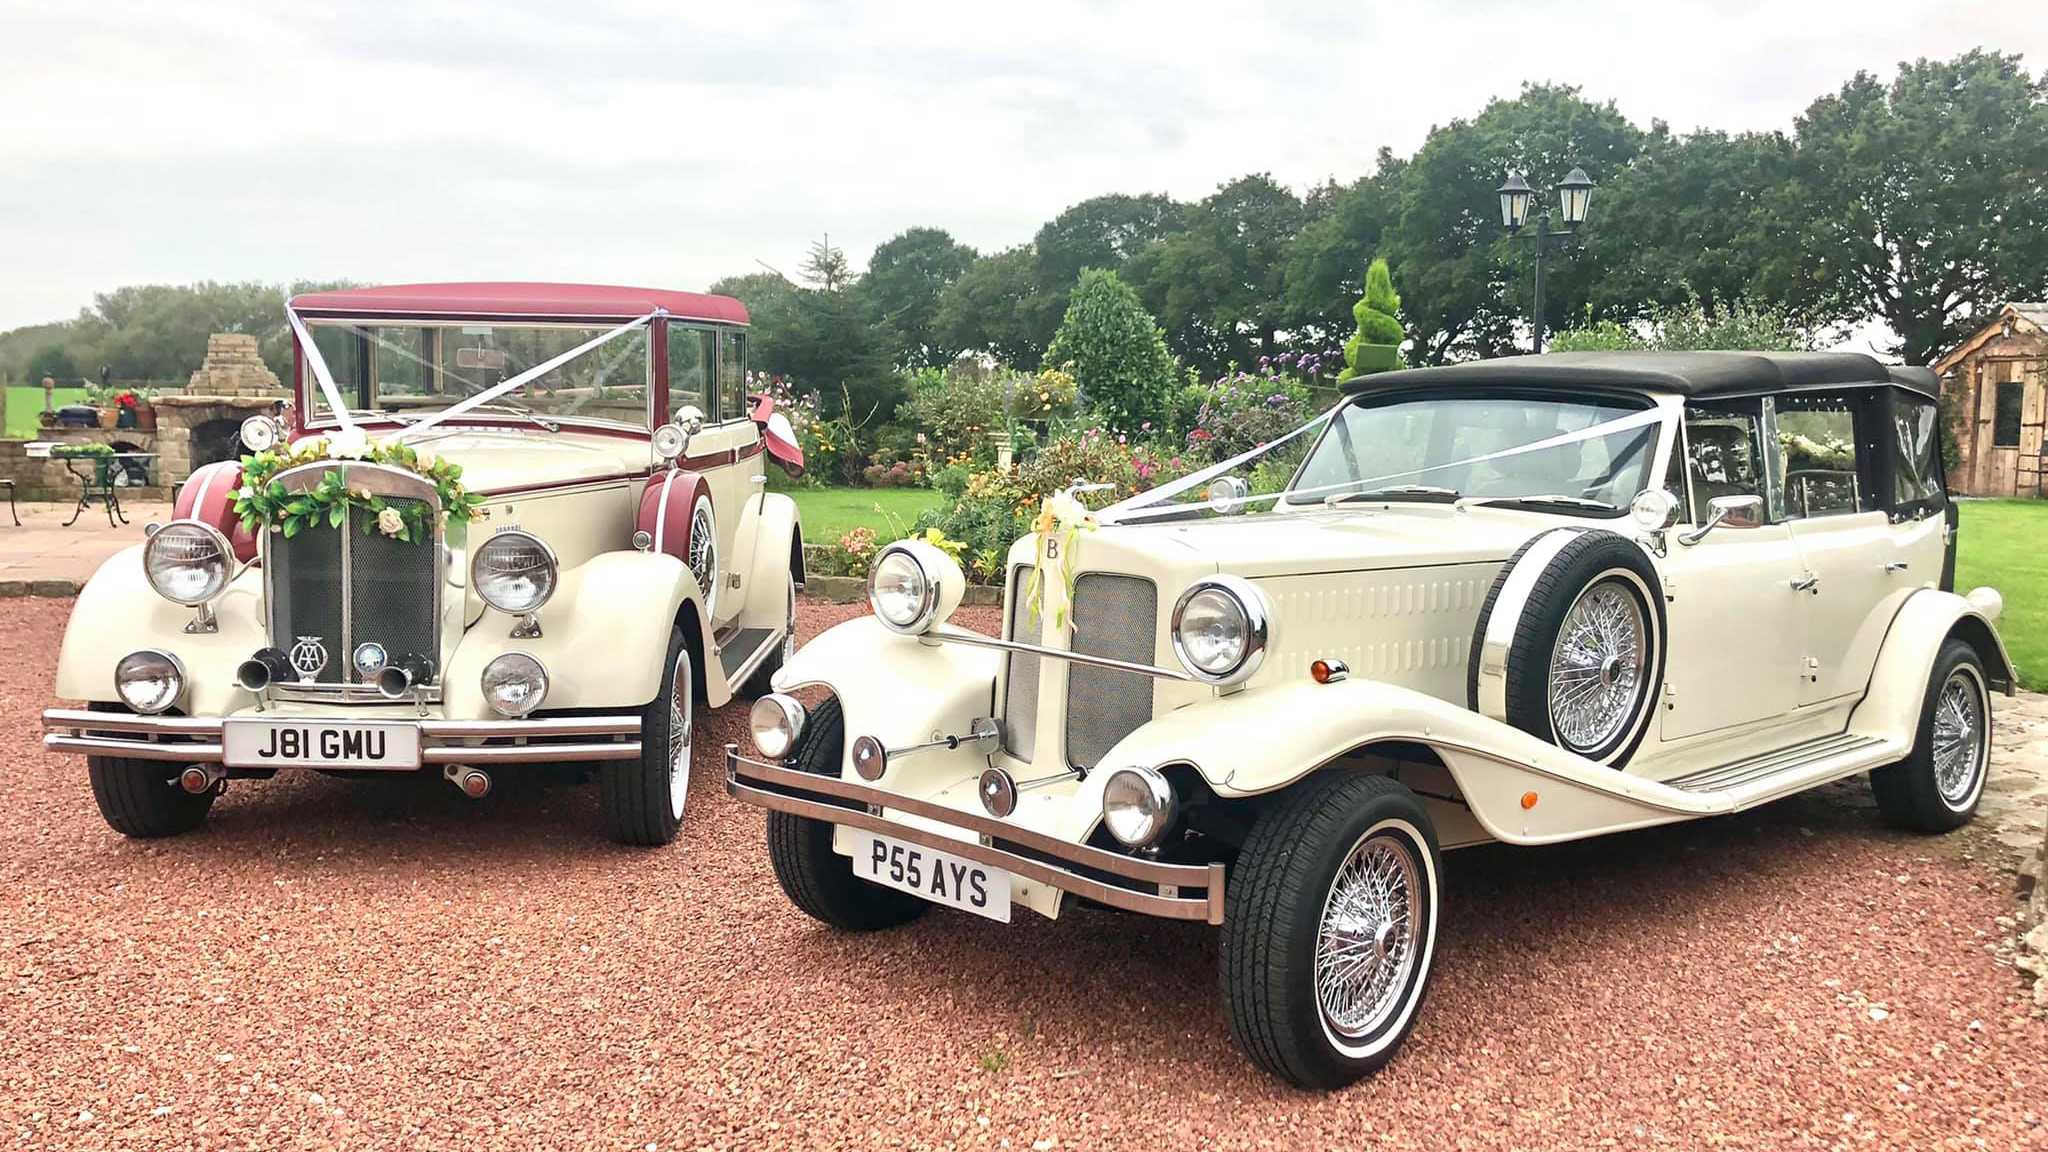 Two vintage wedding cars decorated with white ribbons and bows at a local Blackpool wedding. Both vehicles are parked side-by-side